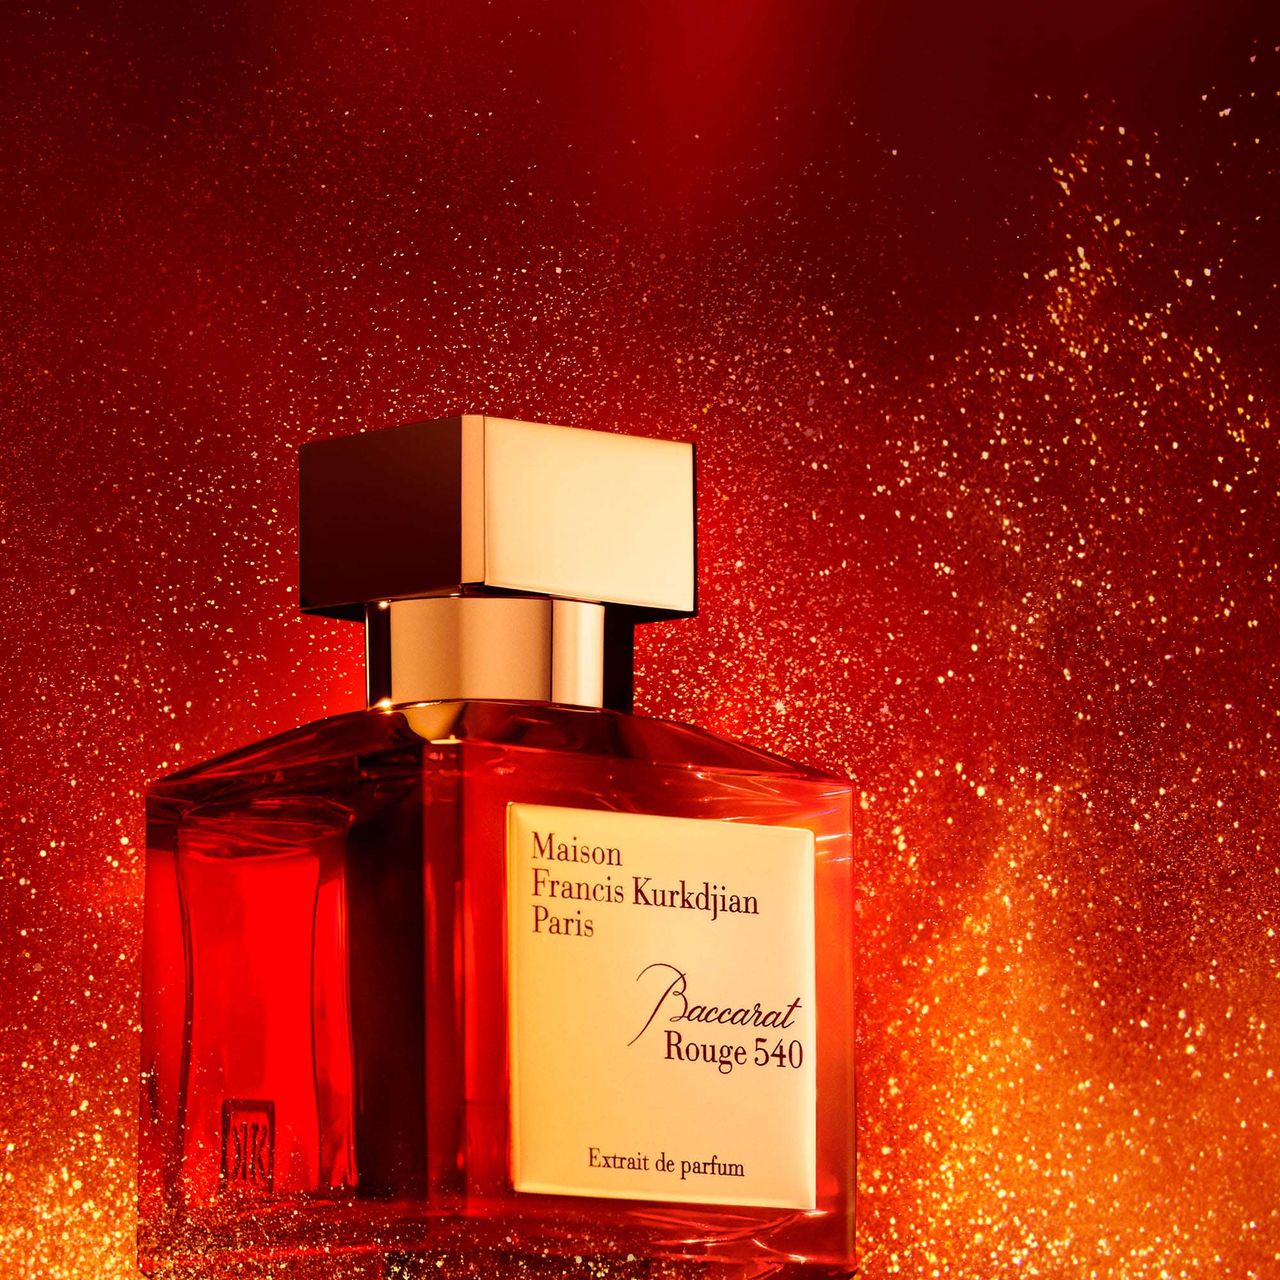 Why is Baccarat Rouge 540 the world's most cult perfume? | Wallpaper